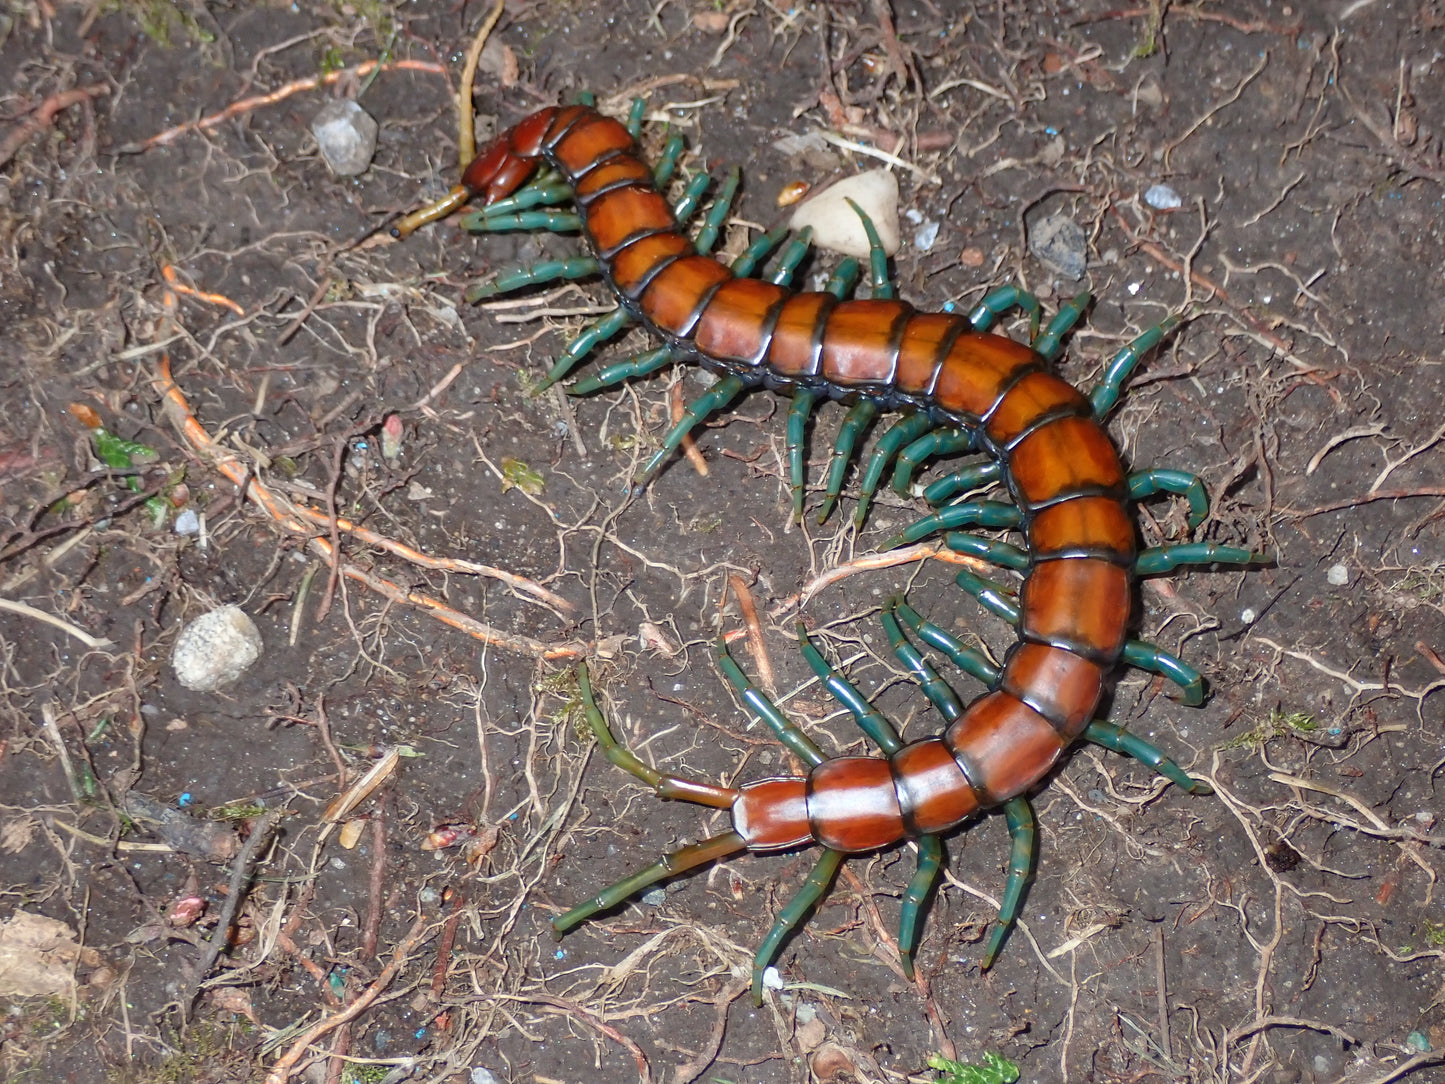 Scolopendra sp. “Mint leg” (missing partial antenna)